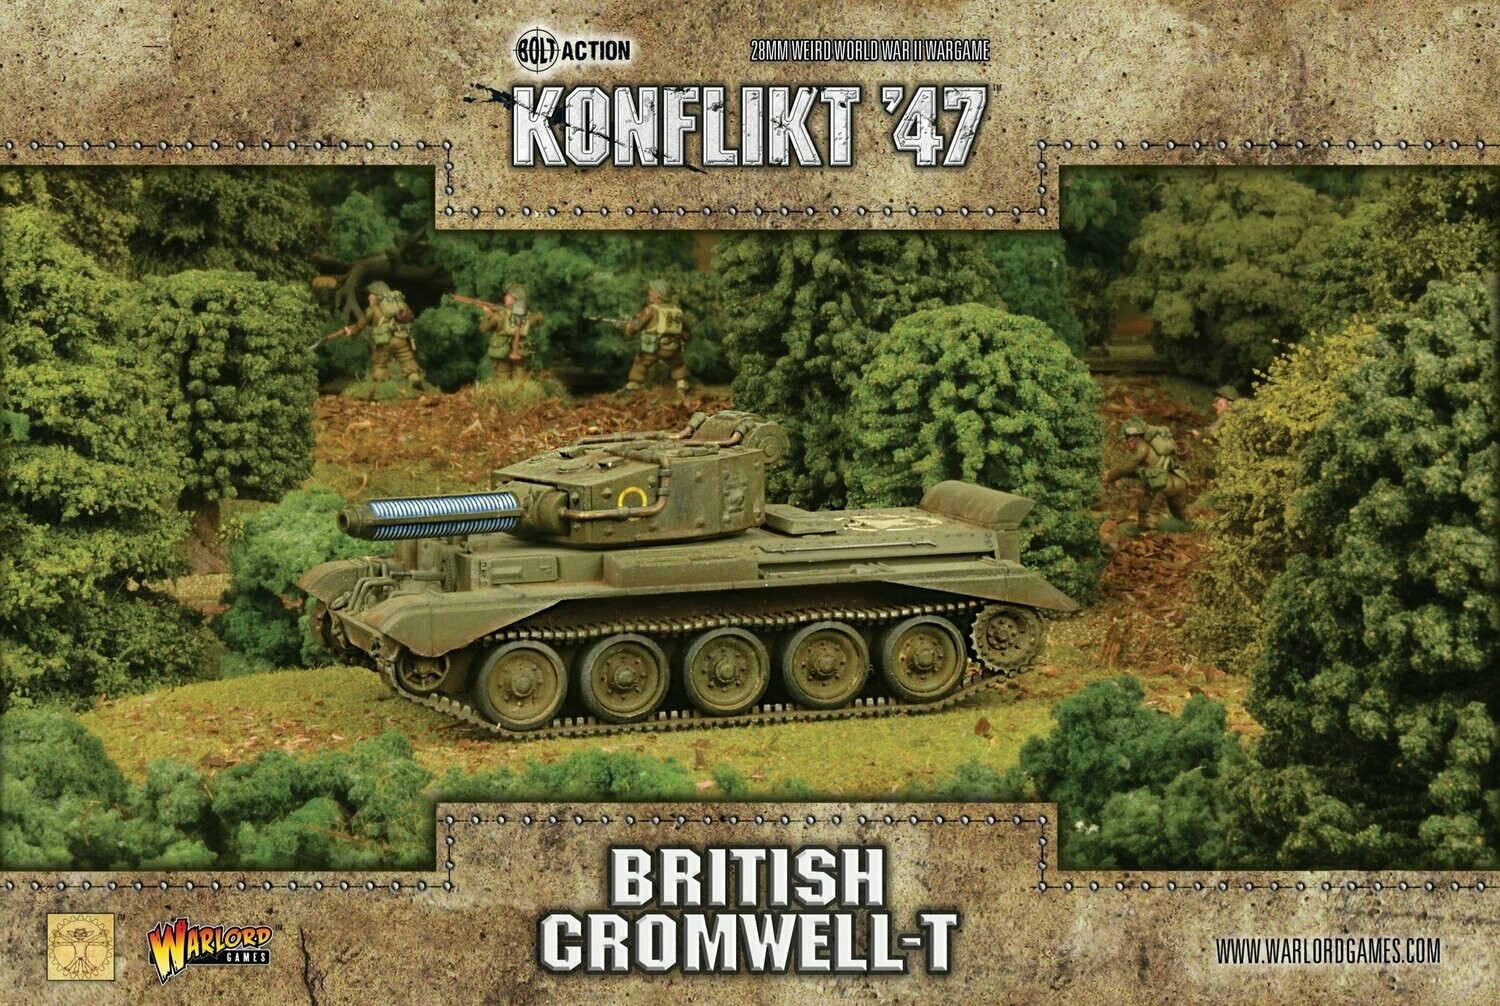 Cromwell with Tesla Cannon - Konflikt '47 - Warlord Games